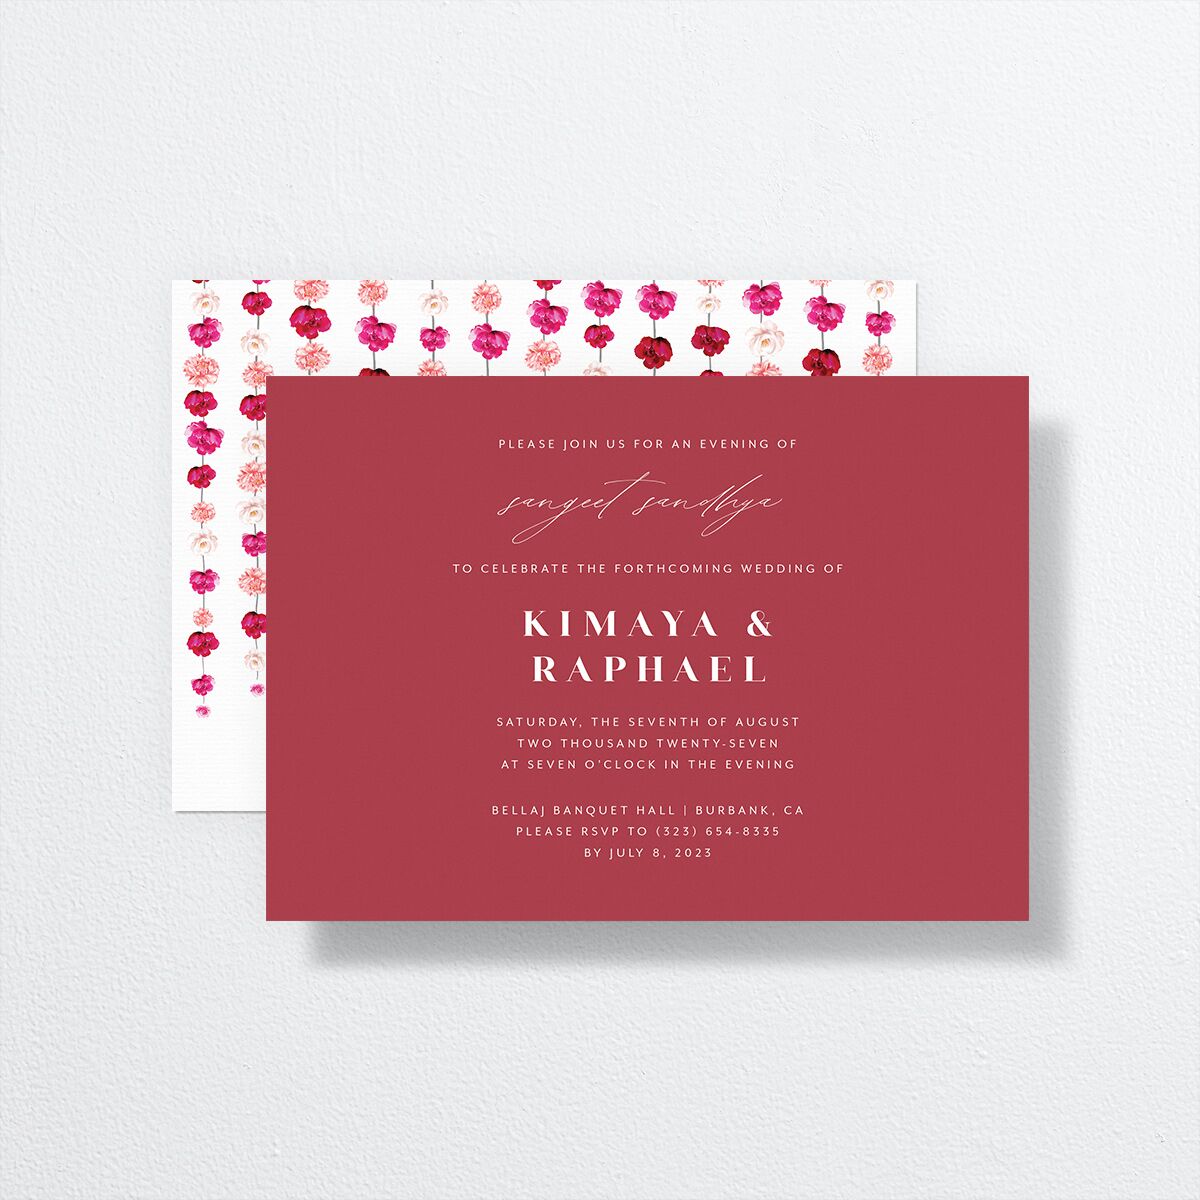 Floral Canopy Bridal Shower Invitation front-and-back in red